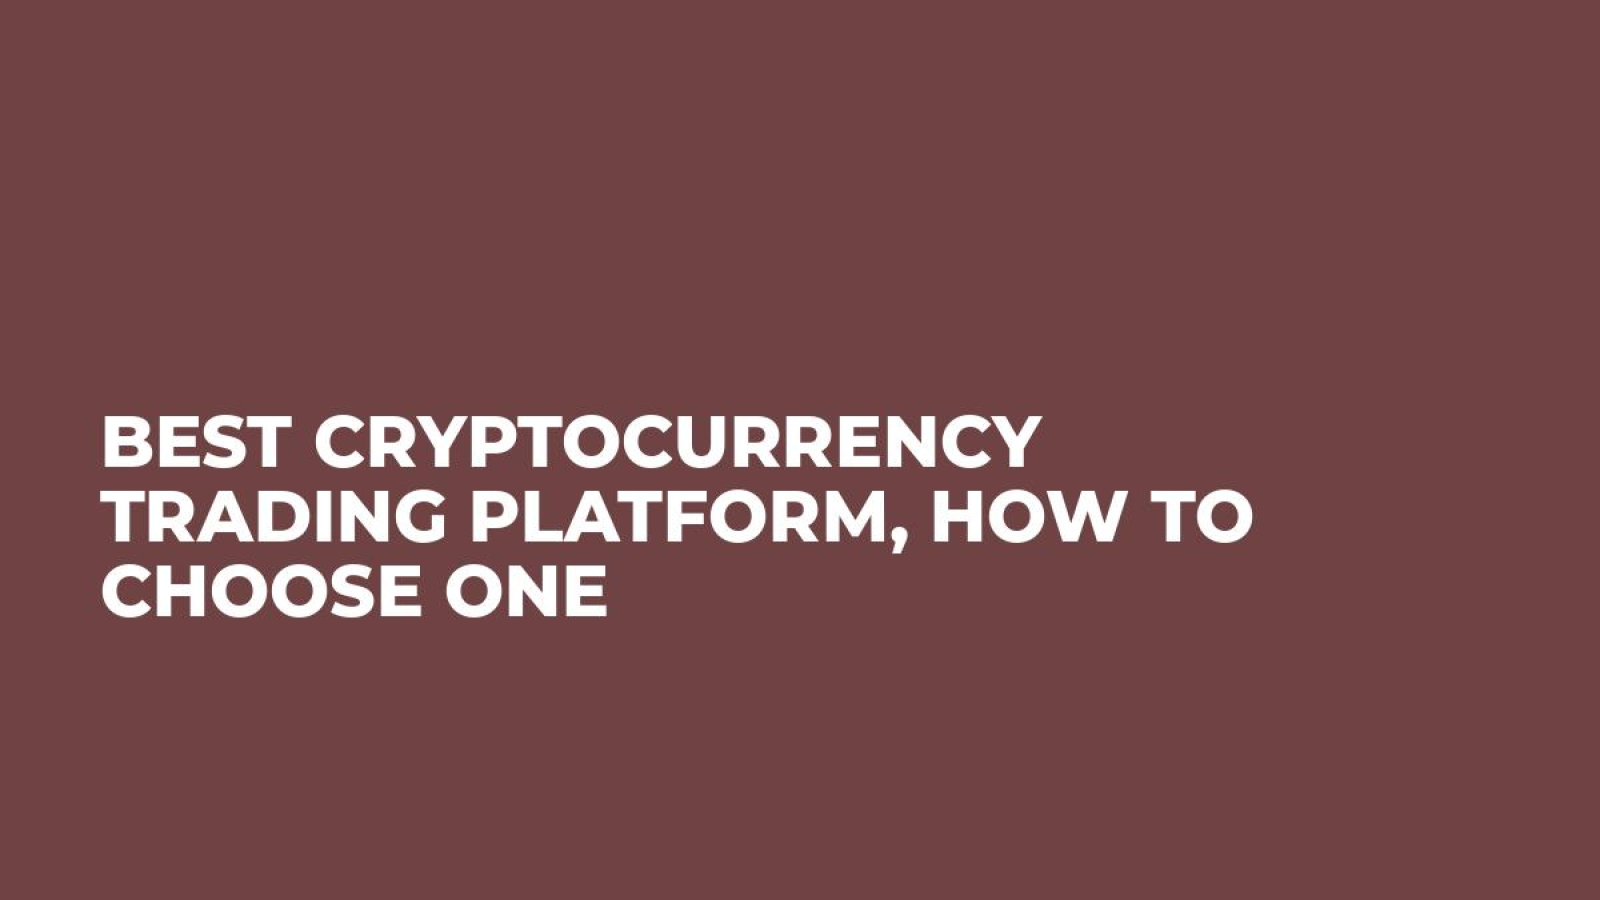 Best Cryptocurrency Trading Platform, How to Choose One